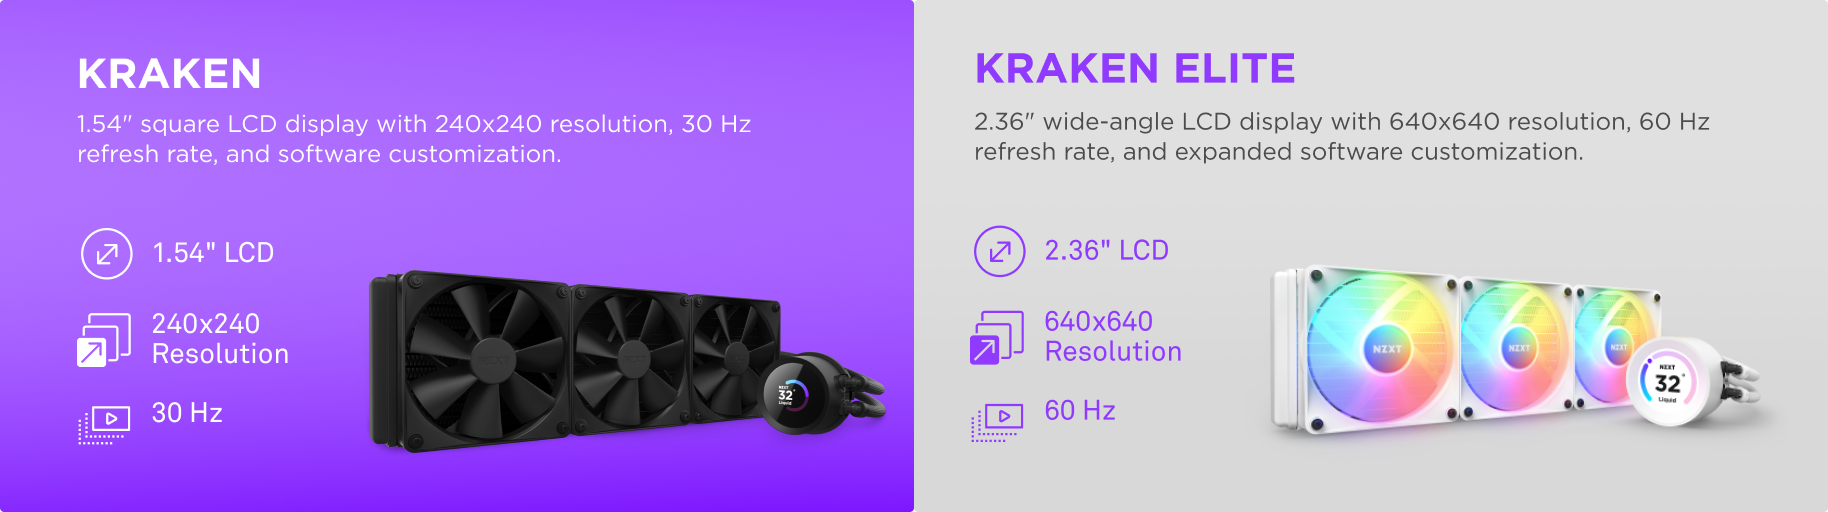 NZXT Kraken 360 120mm Fans + AIO 360mm Radiator Liquid Cooling System with  1.54 LCD Display and F Series Fans Black RL-KN360-B1 - Best Buy